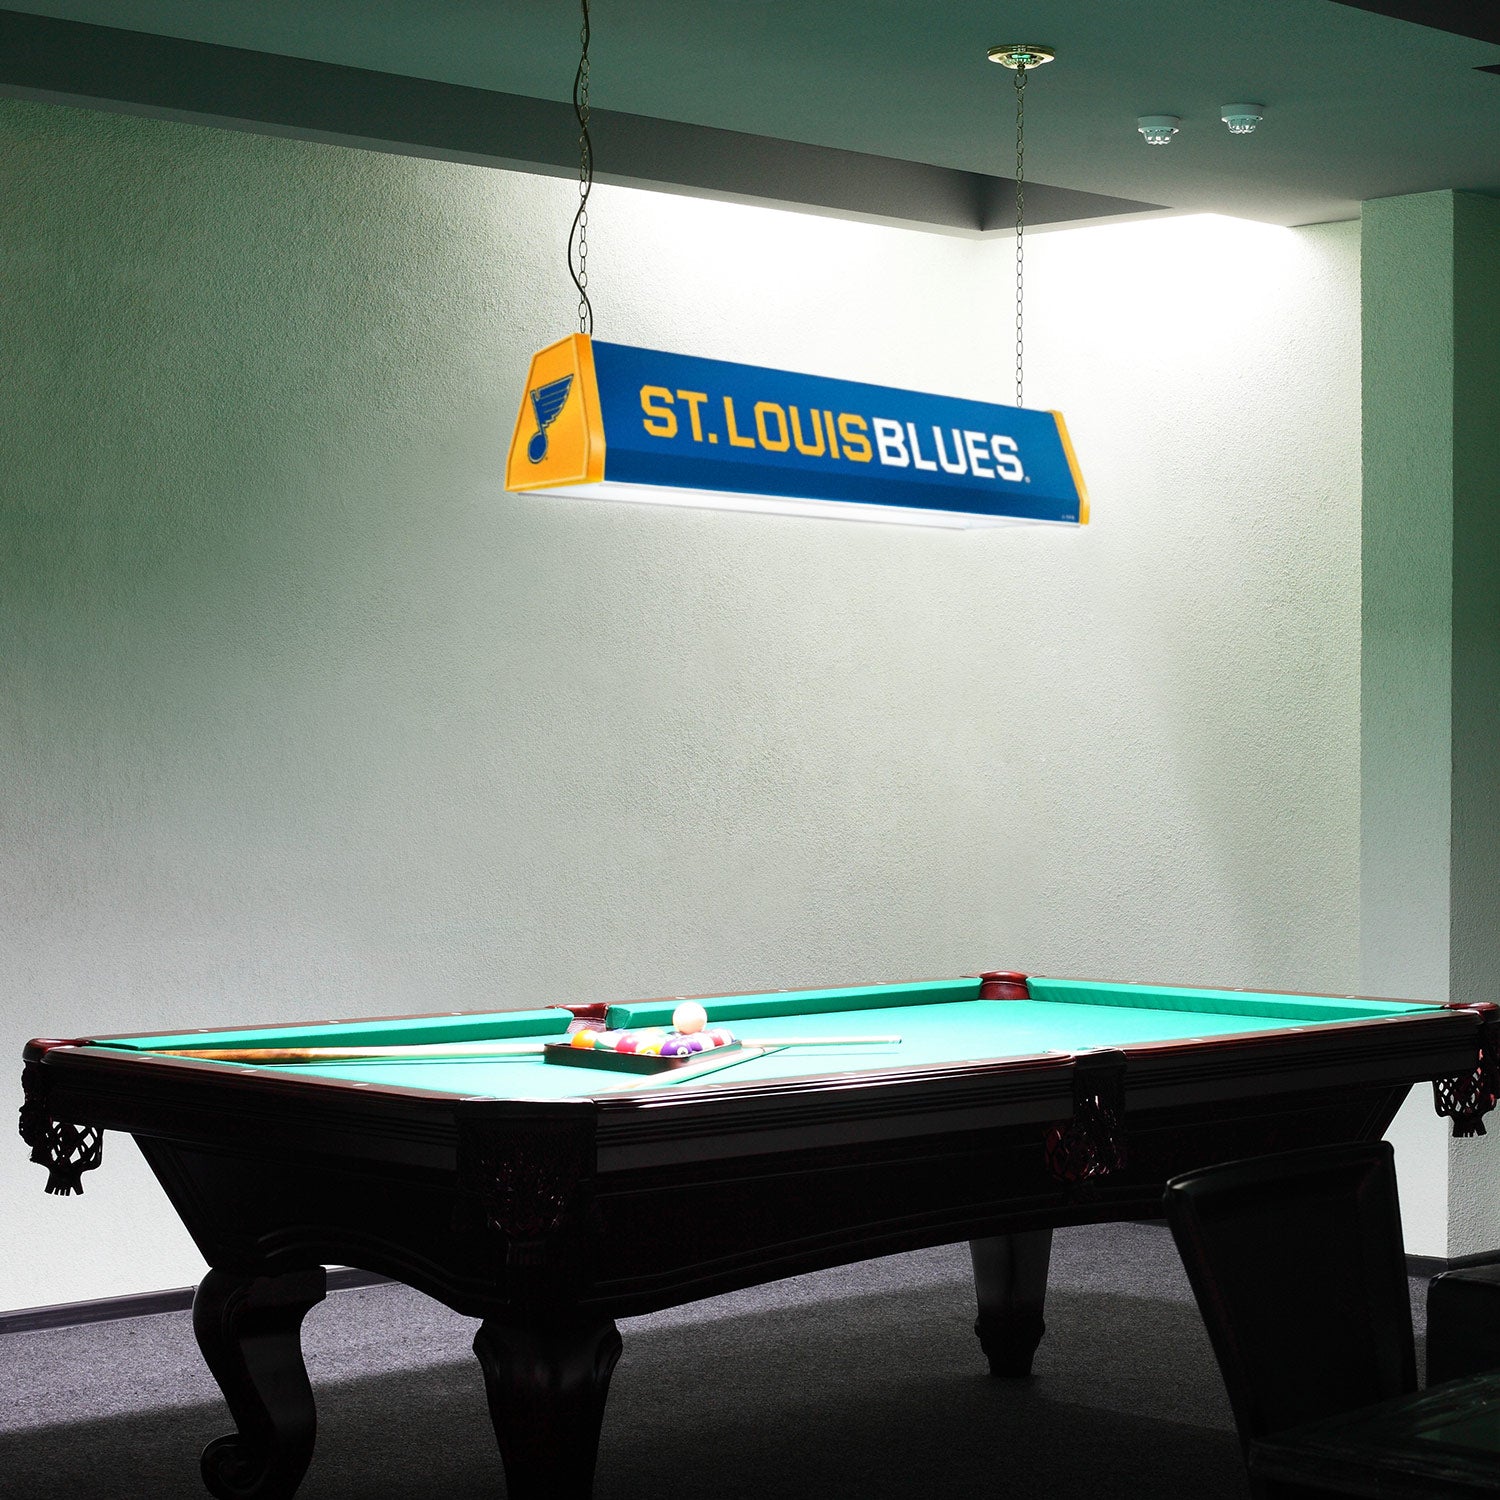 St. Louis Blues Standard Pool Table Light Room View